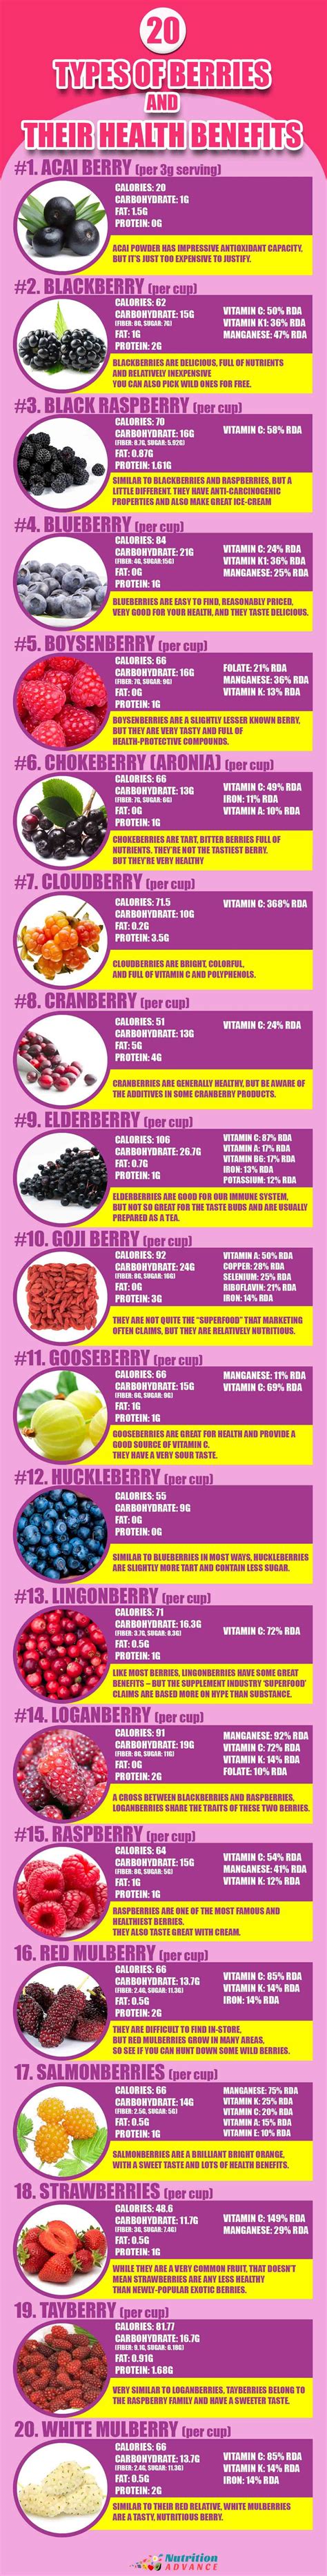 Discover The Health Benefits Of 20 Types Of Berries